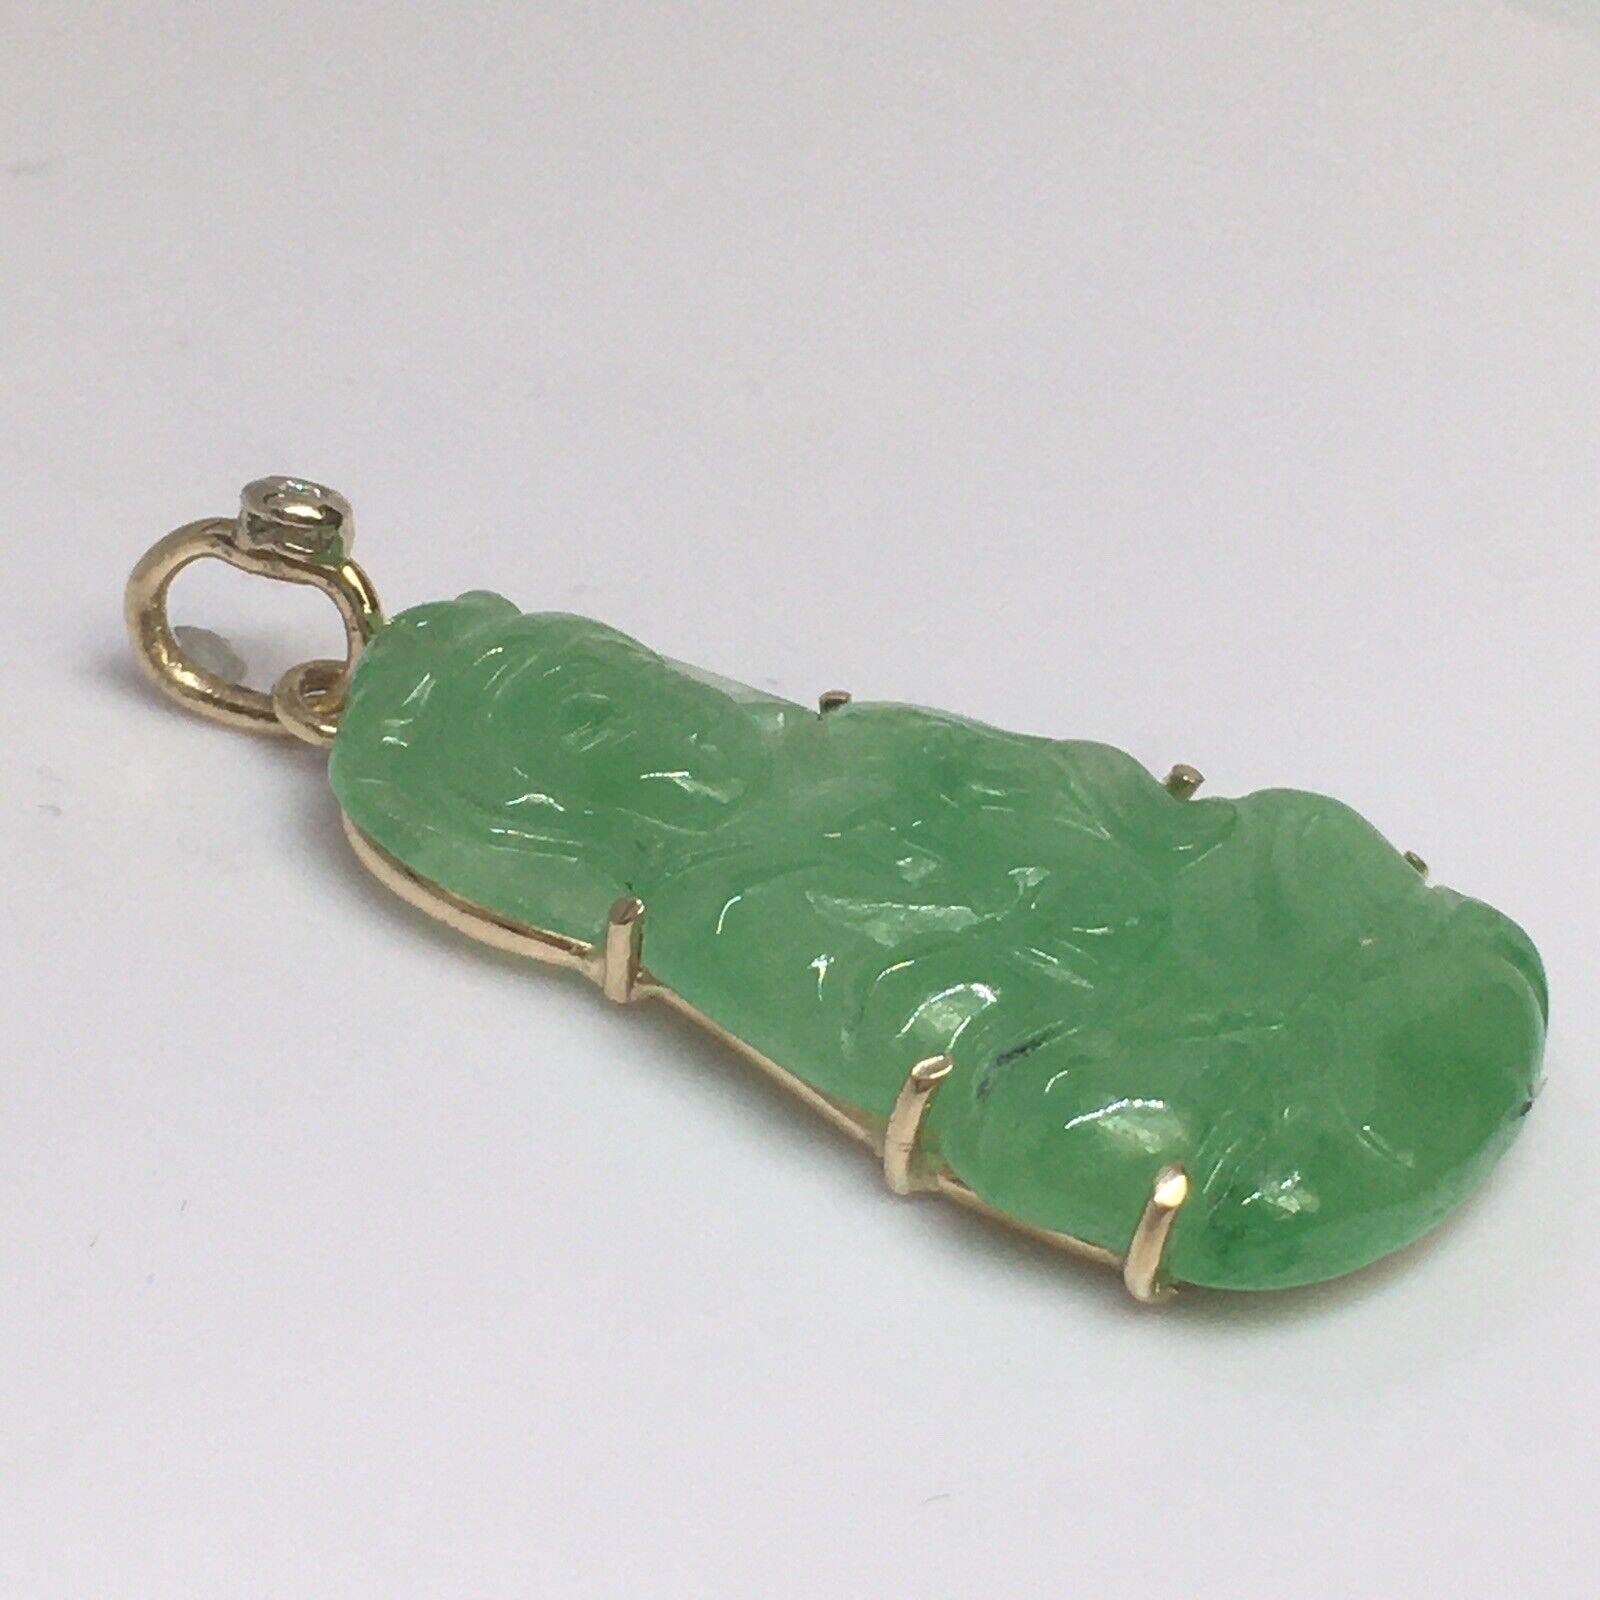 14K Yellow Gold Jadeite Jade Sitting Buddha Charm Diamond Pendant   

Hangs: 1.75 inch
Weight: 8.2 Gram 
Condition: No chips, no damage, in excellent preowned condition 

American made Quality Workmanship 